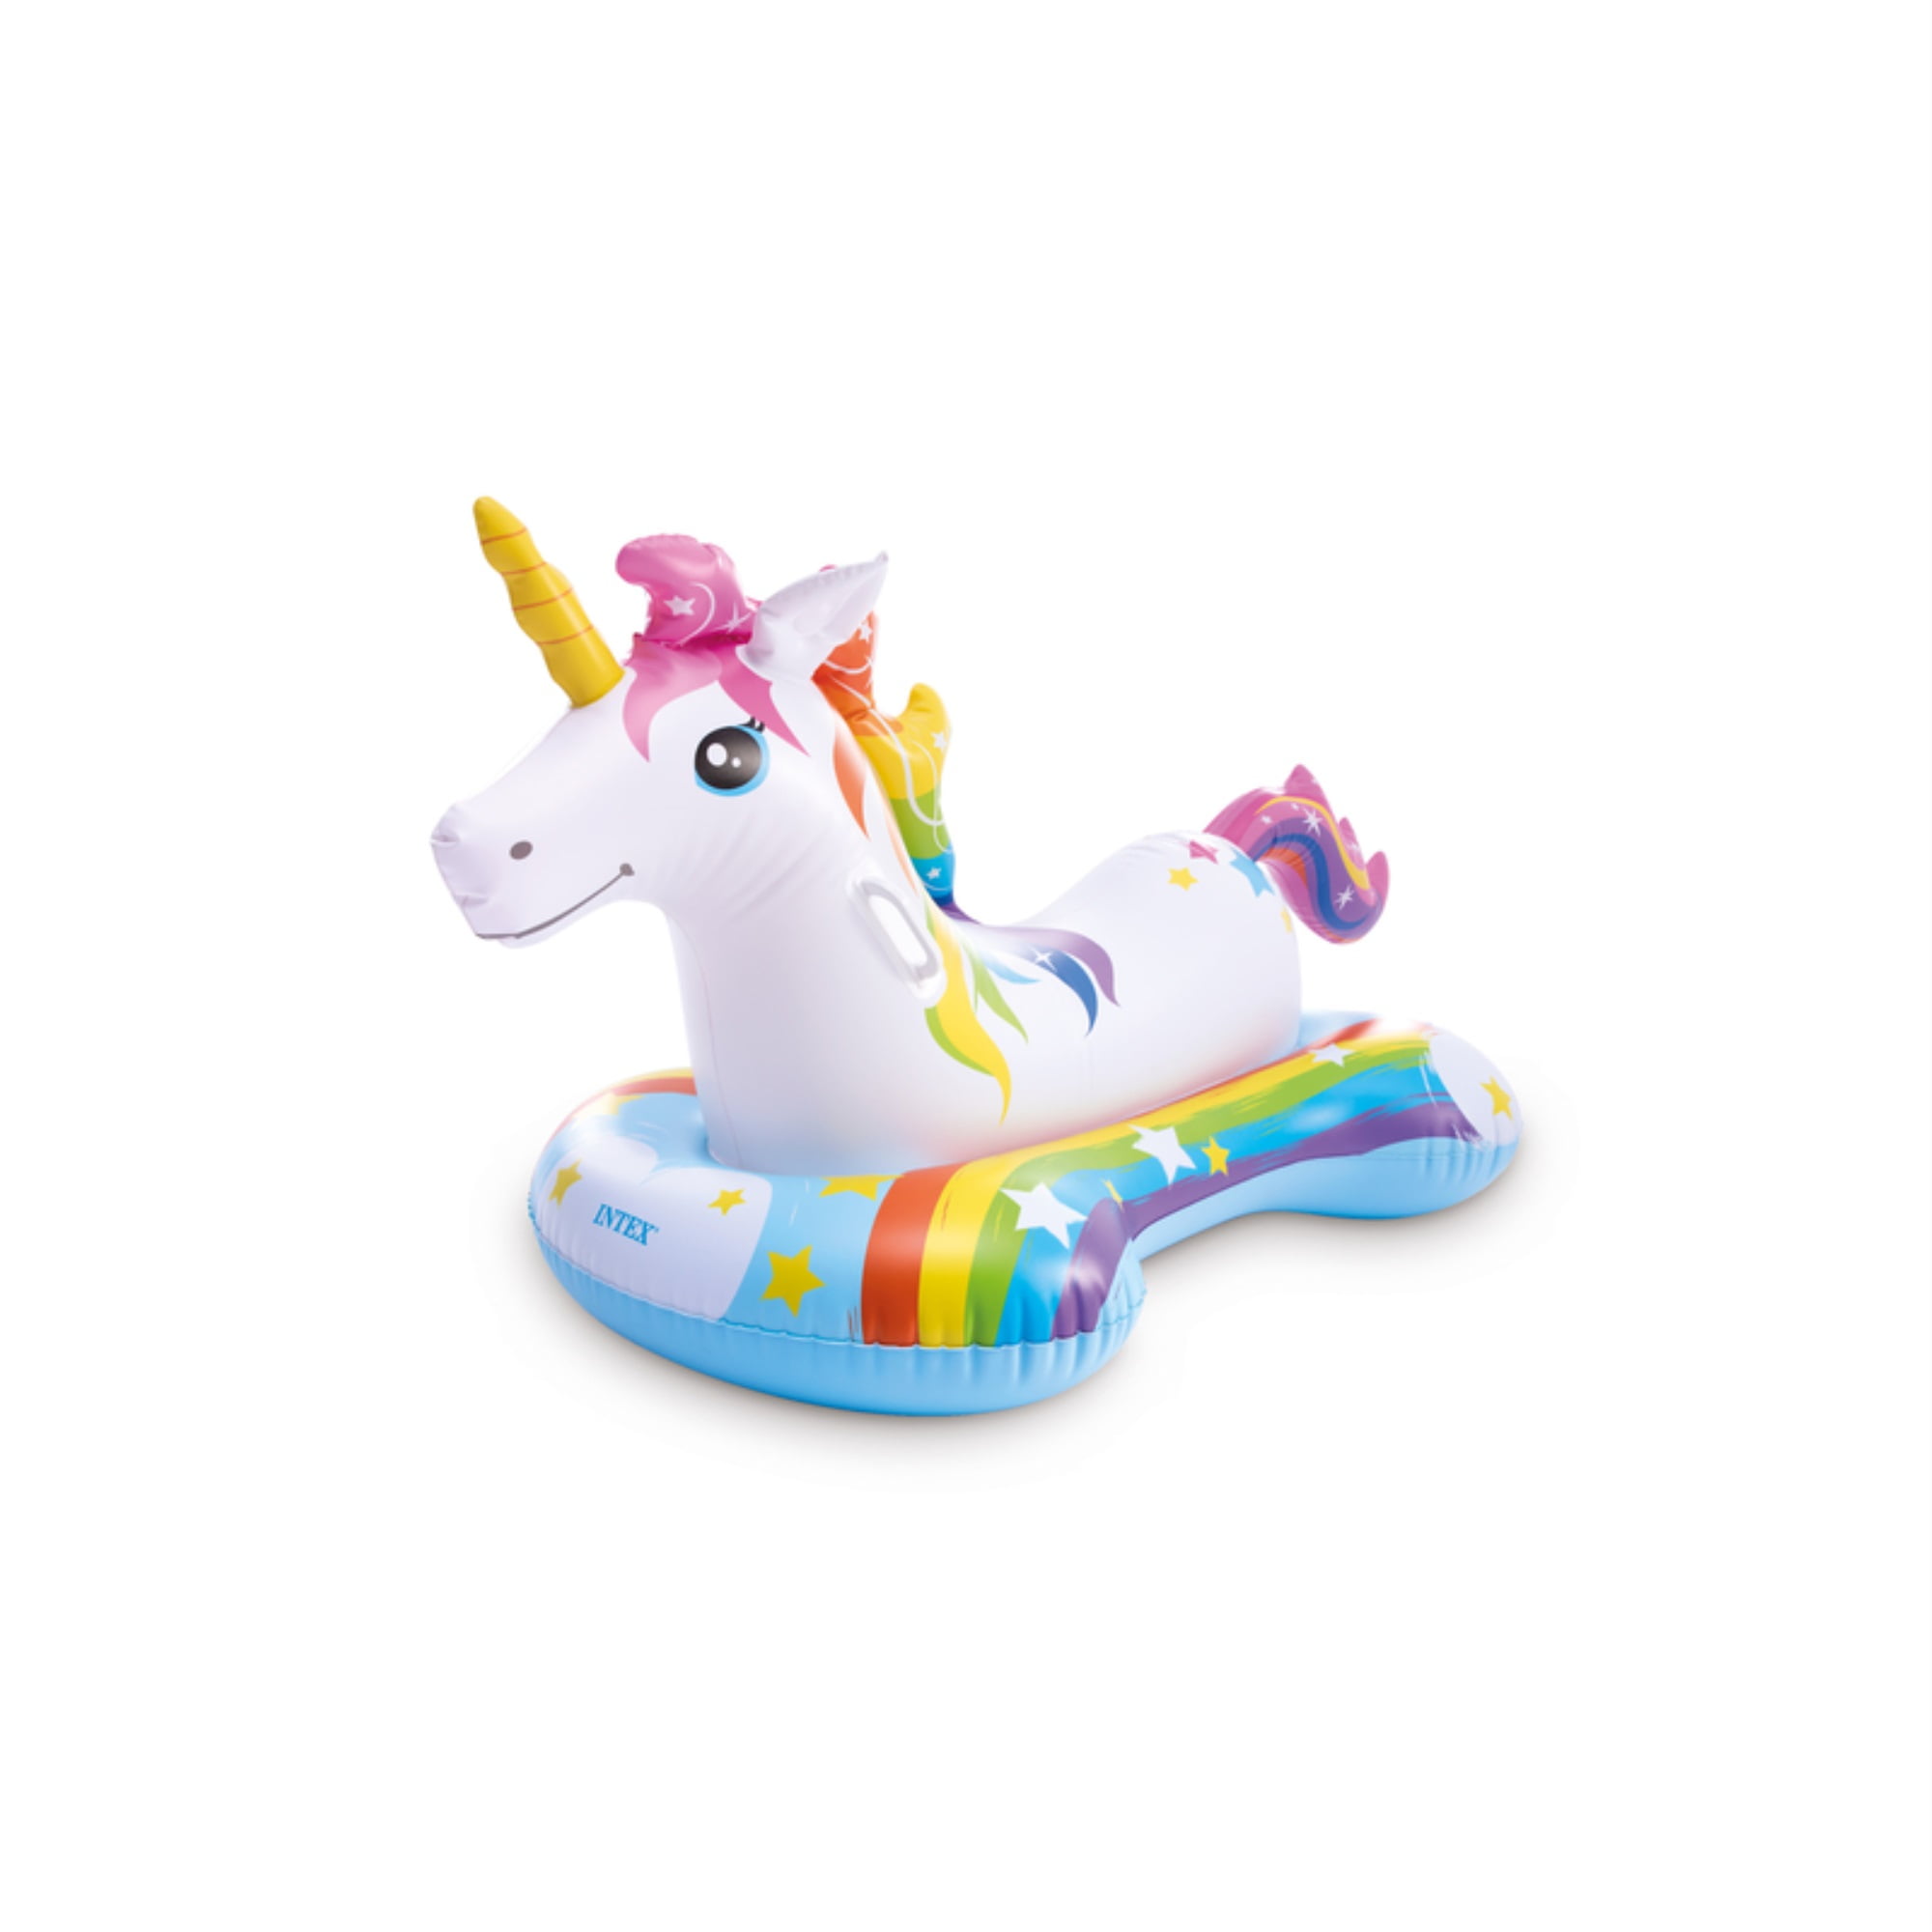 Details about   LAYCOL Unicorn Sprinkler for Kids Giant Inflatable Unicorn Pool Float Ride On Up 